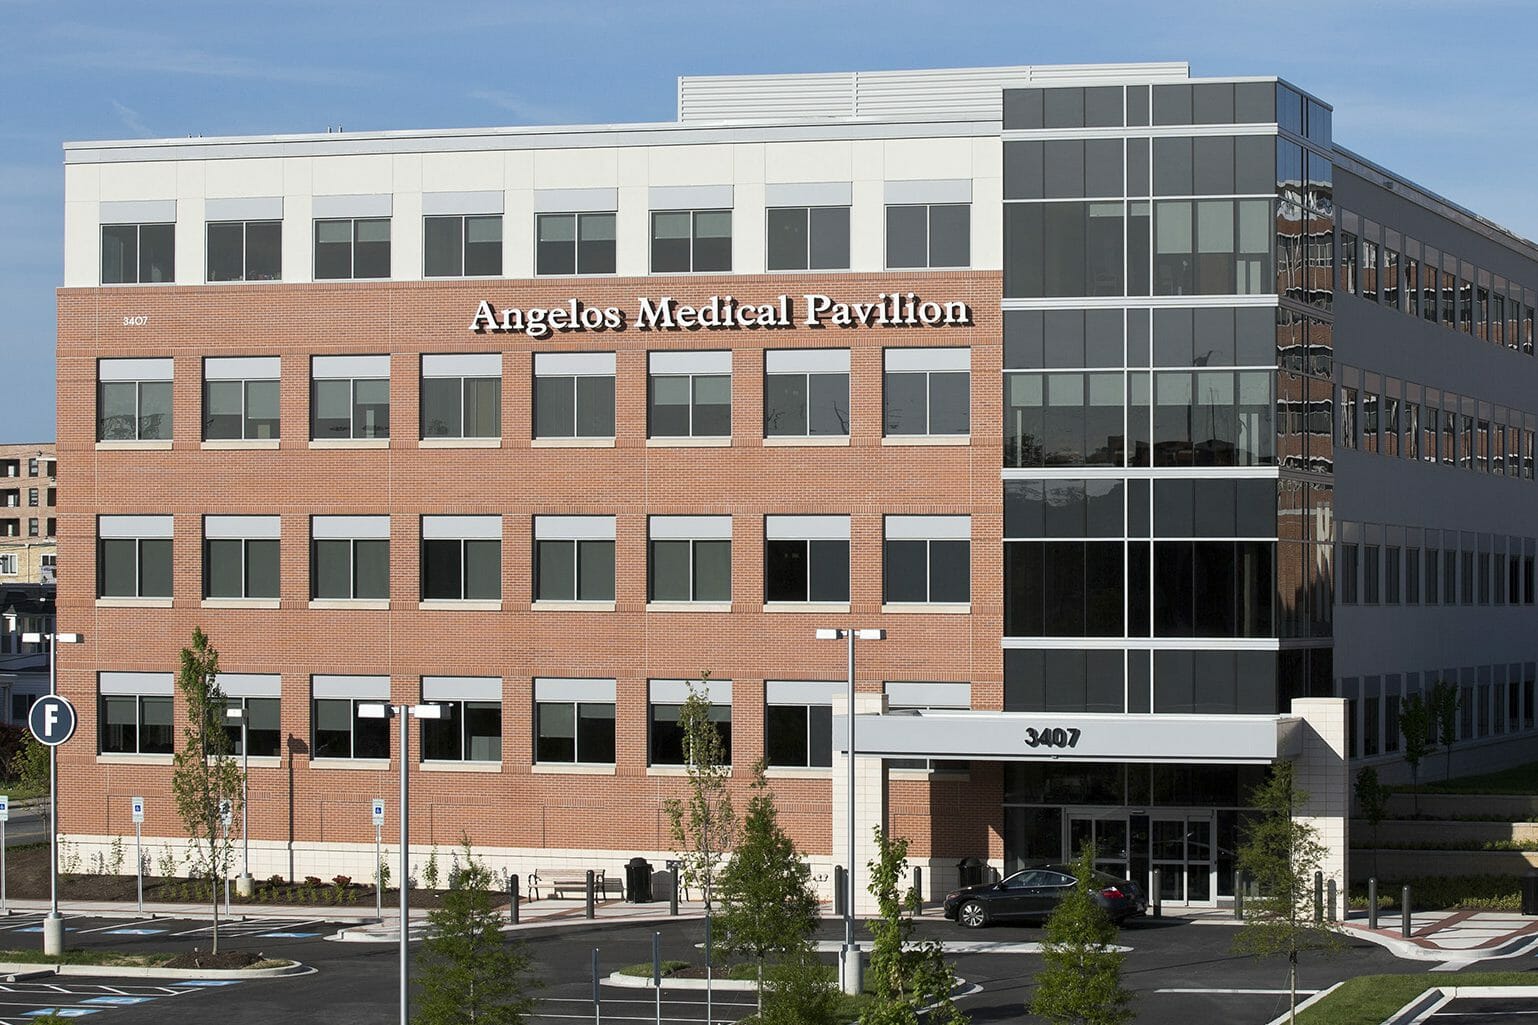 Close-up exterior view of Angelos Medical Pavilion with brick exterior and silver accents with a car in front of the main entrance